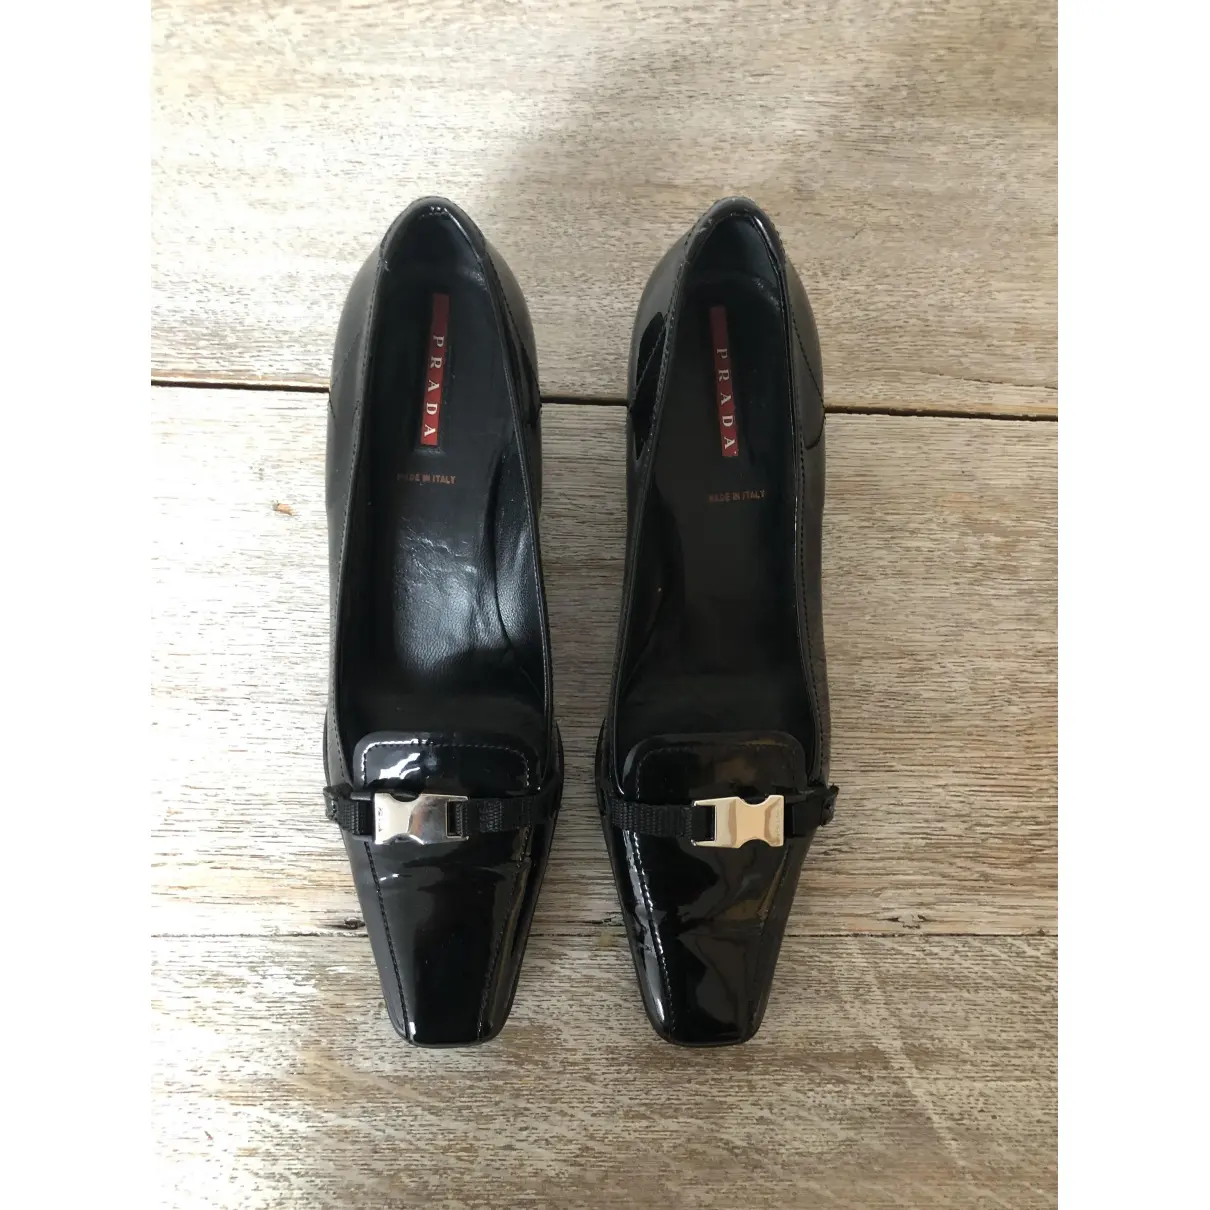 Prada Patent leather flats for sale